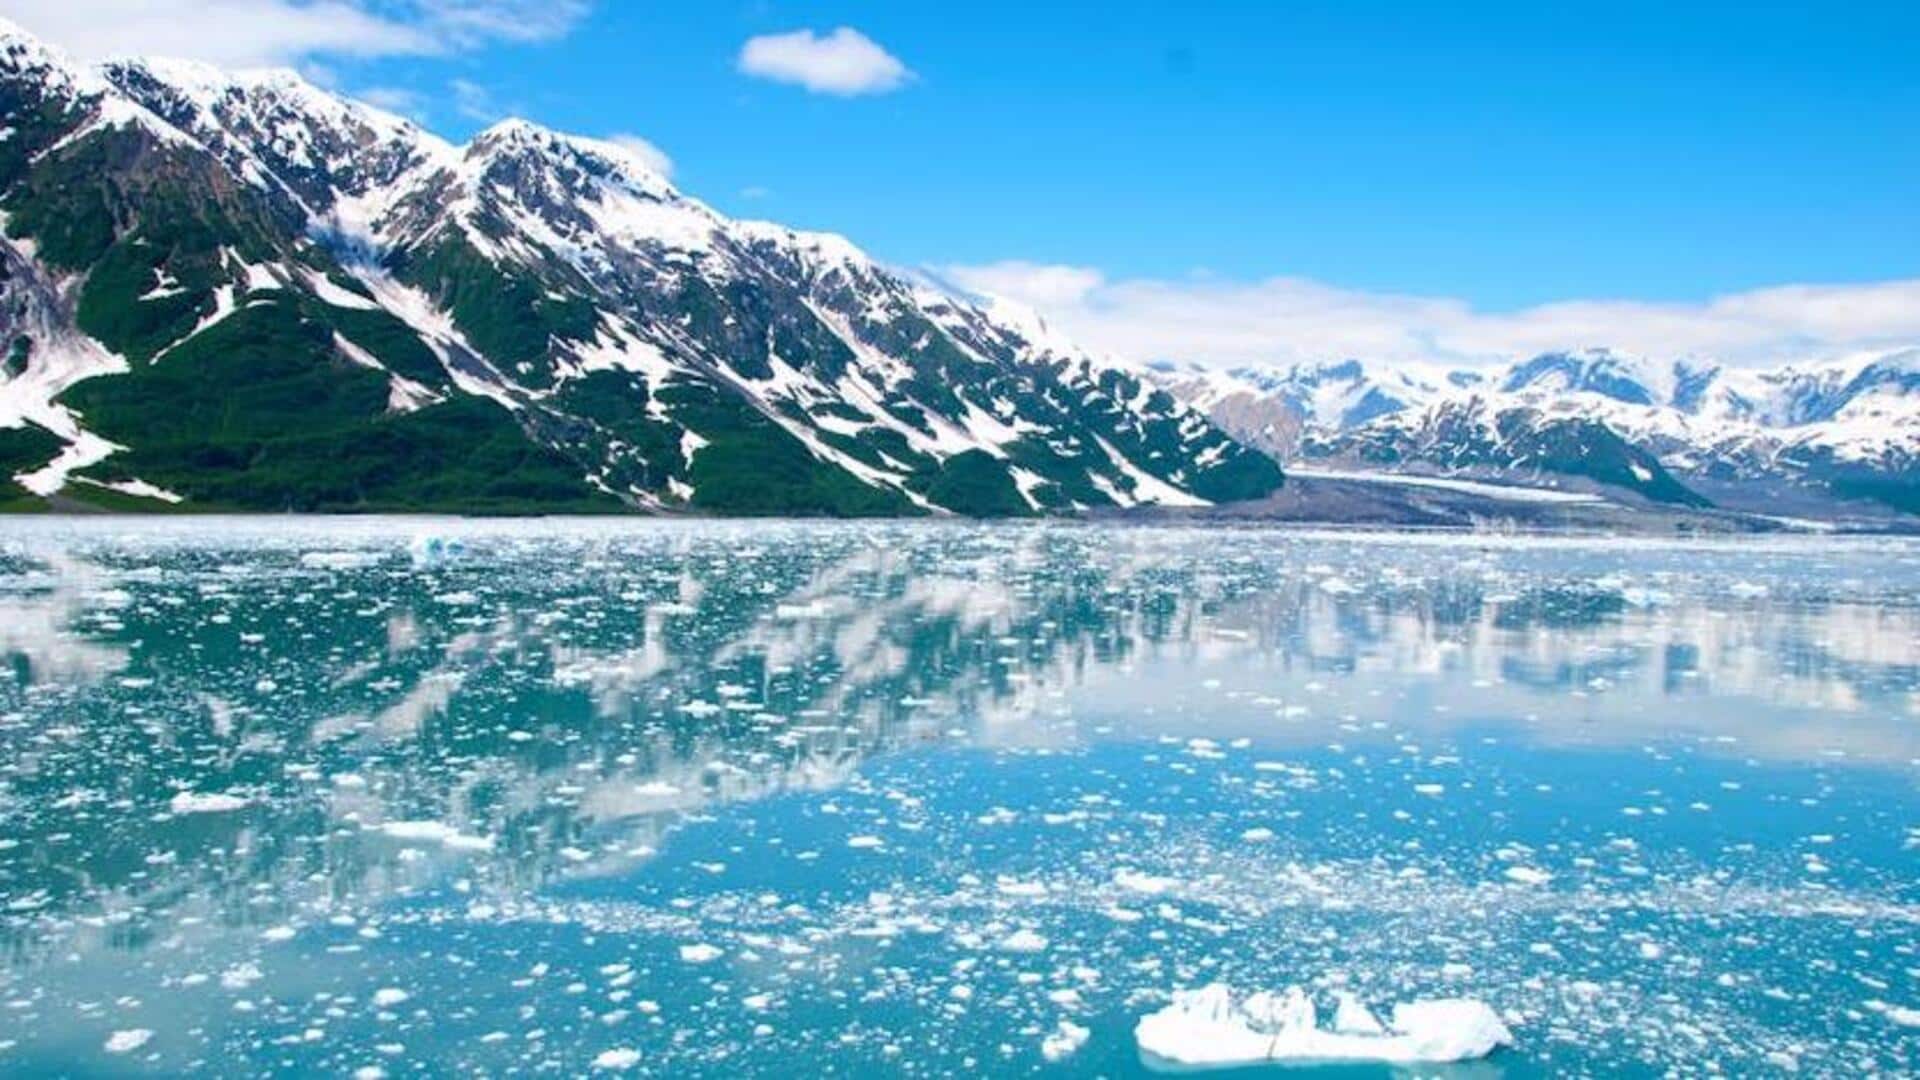 Discover Ushuaia, Argentina's glacial majesty with these top recommendations